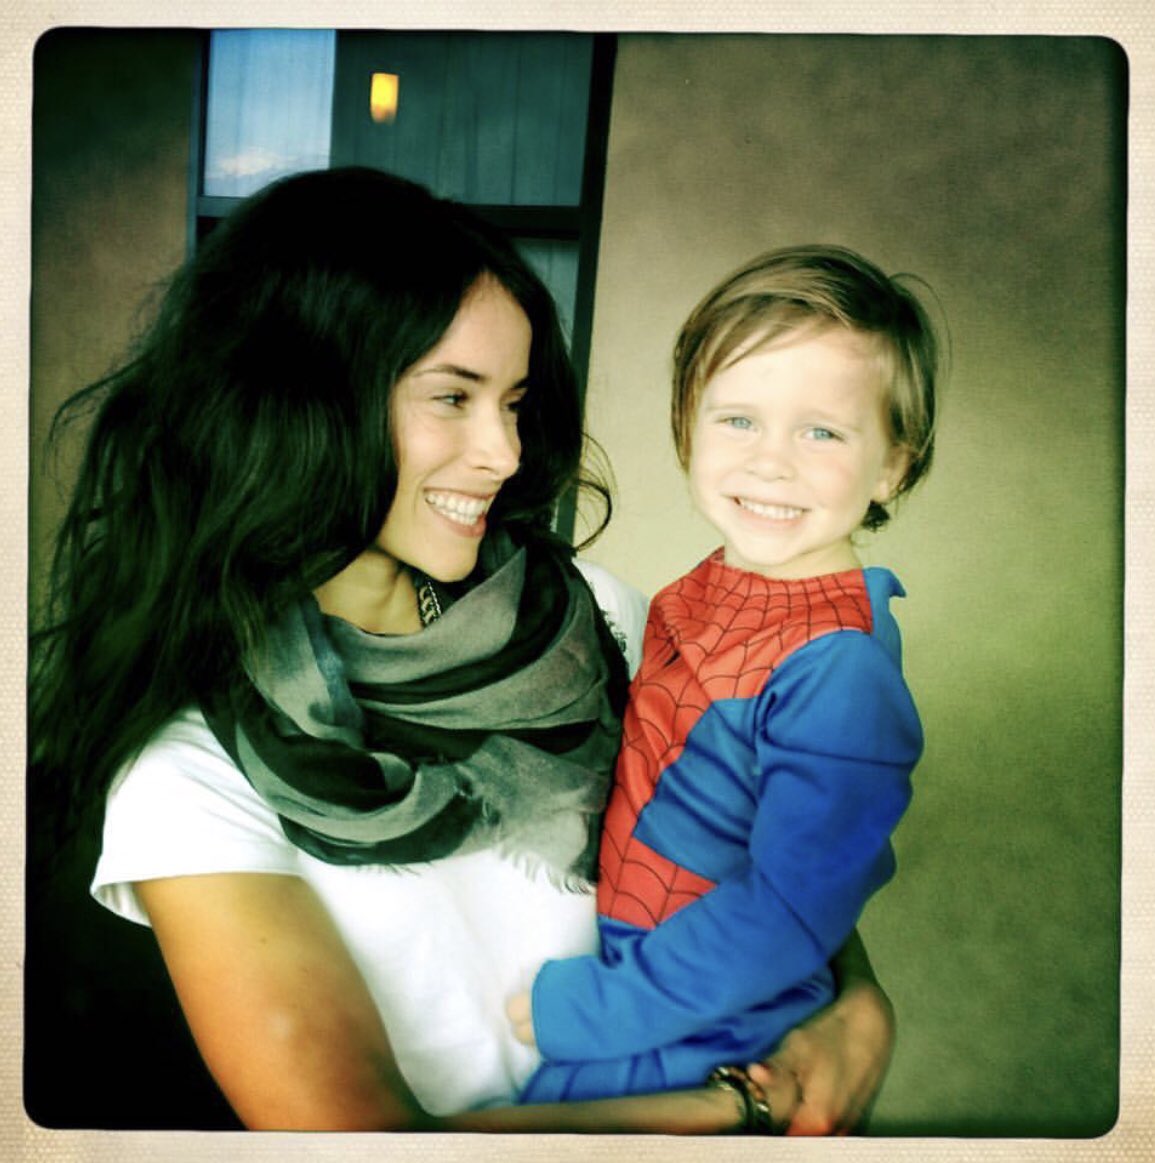 Spencer with her son